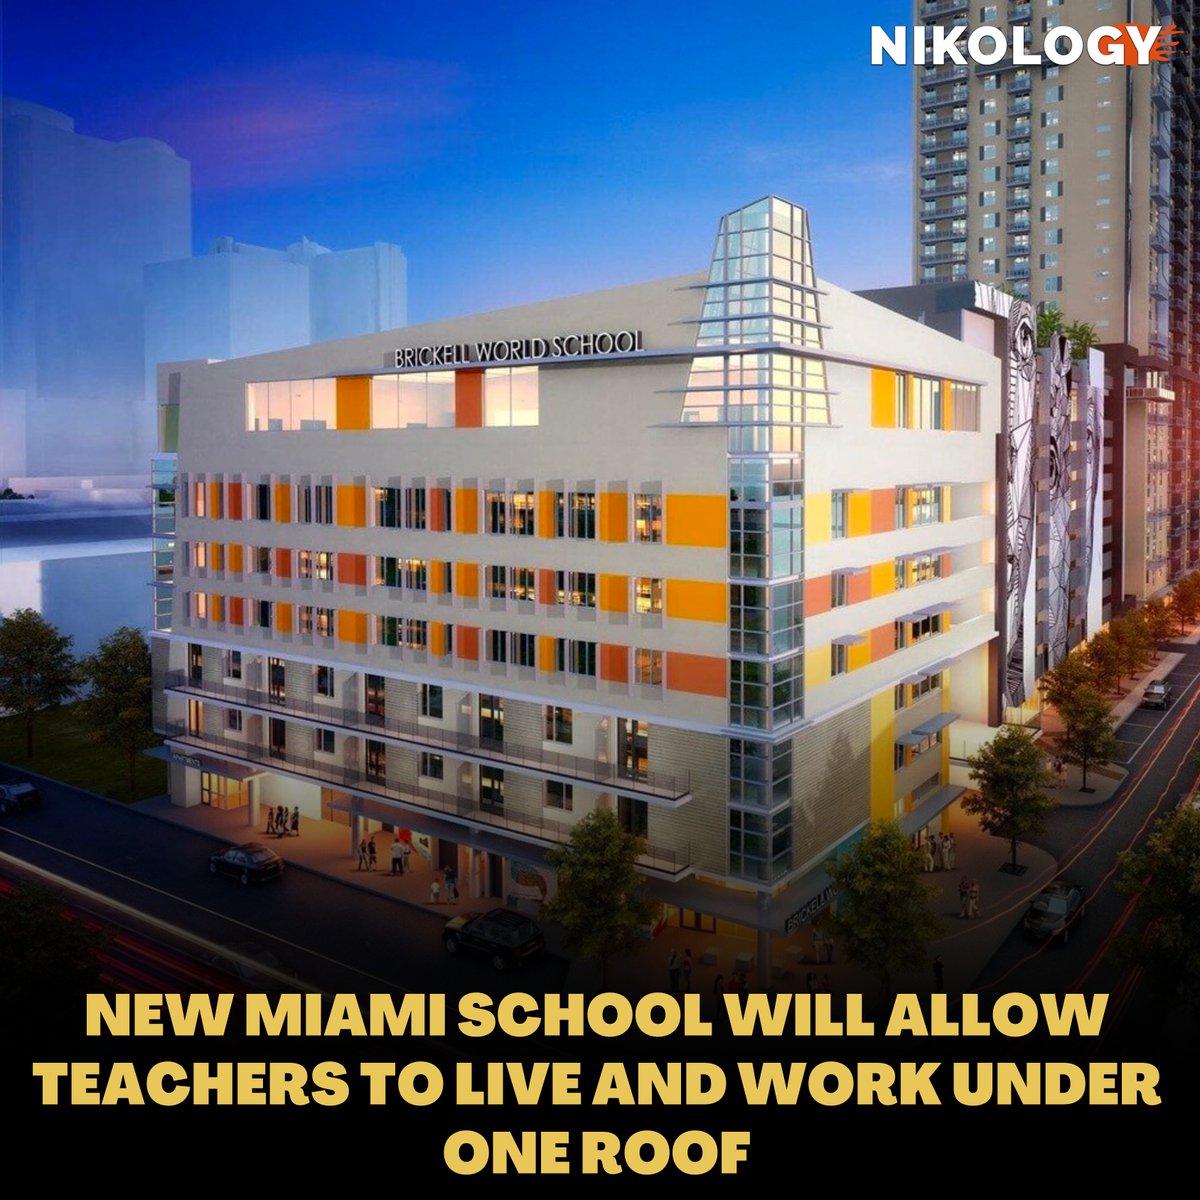 Miami-Dade County Public Schools is collaborating with public housing and community development in Miami's Brickell neighbourhood to create a multifaceted solution to address the teacher shortage.

#school #education #teachers #miami #explore #explorepage #mehersheikh #nikology